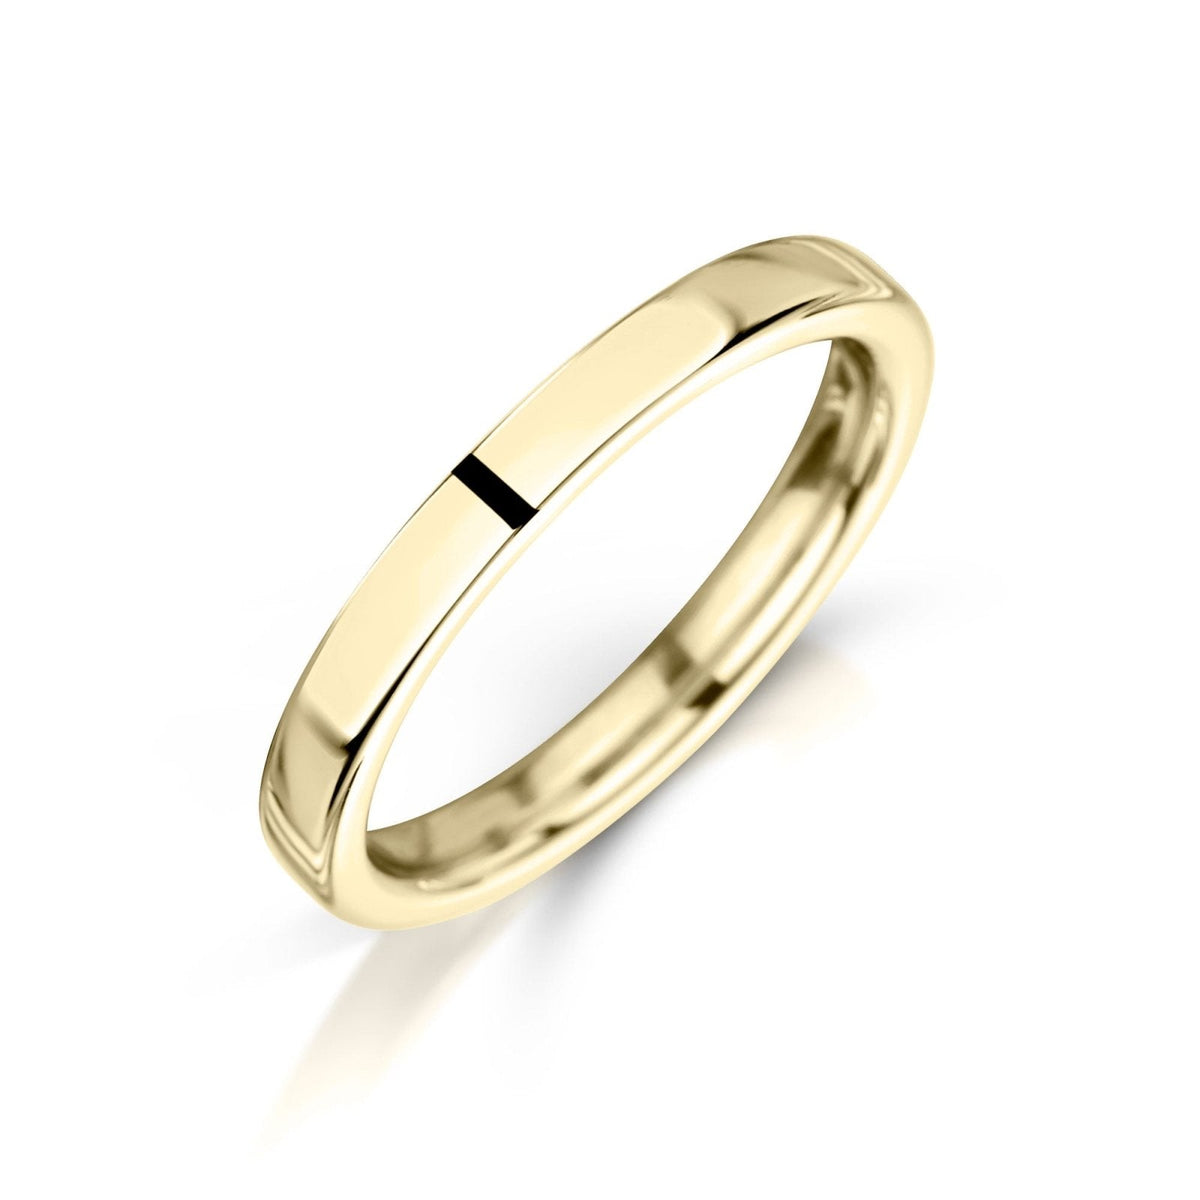 Angled view of a 2.5mm Wide plain ladies gold wedding ring on a white background.